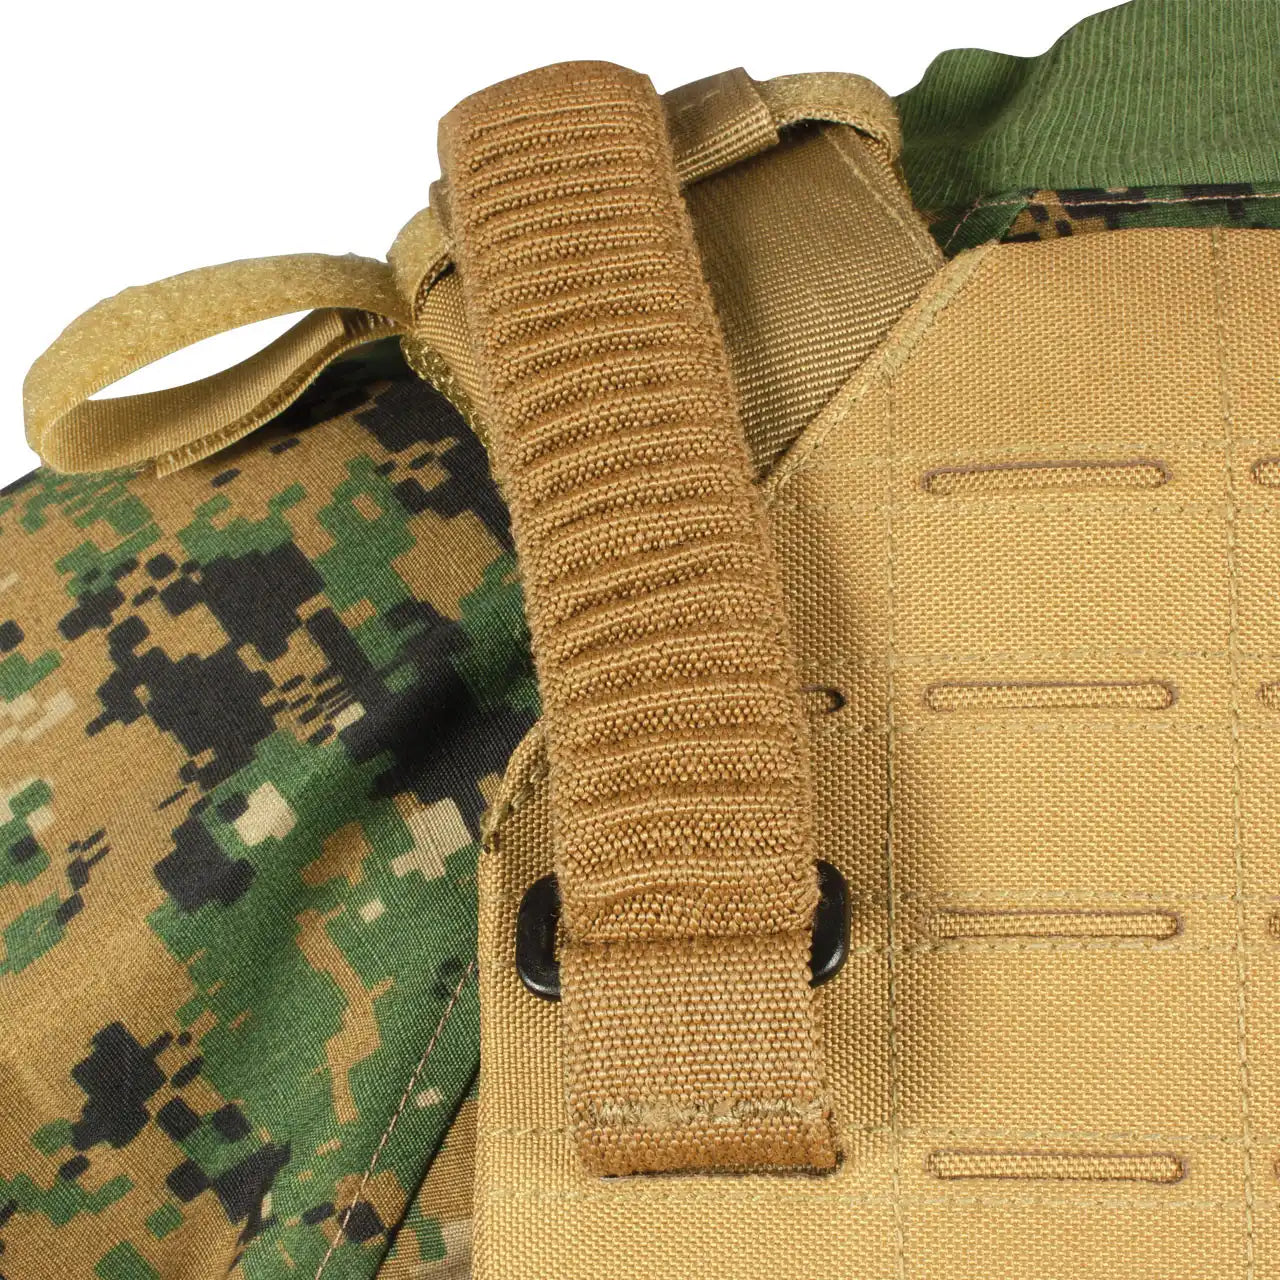 US Tactical | MOLLE Shock Webbing Sling with QD Swivel